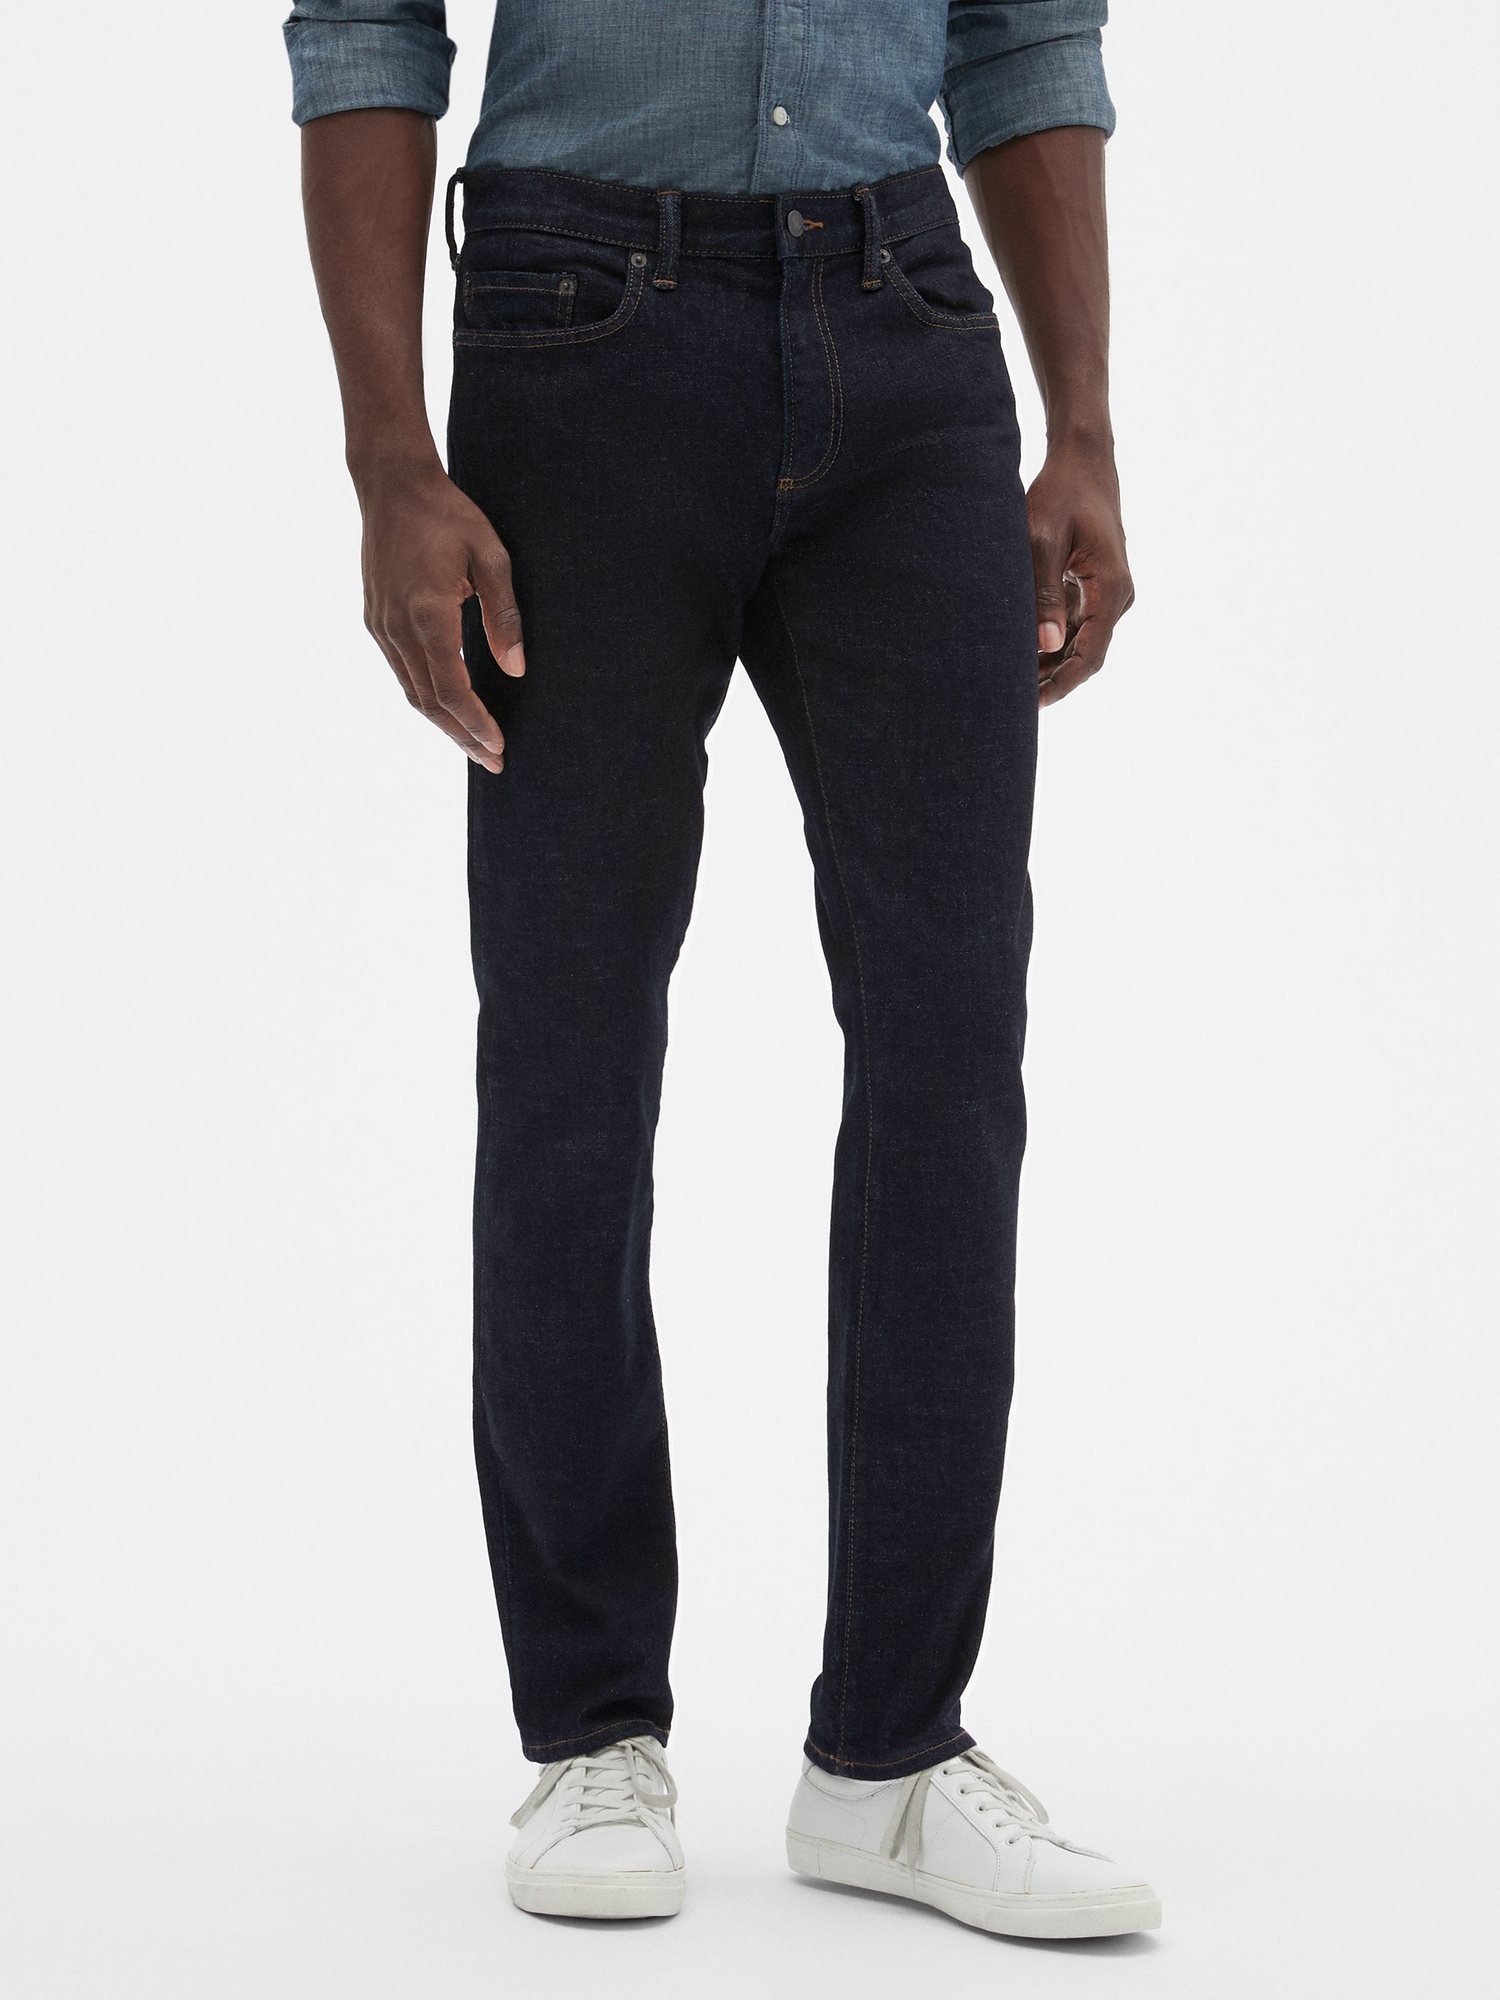 Skinny Fit Jeans with GapFlex | Gap Factory